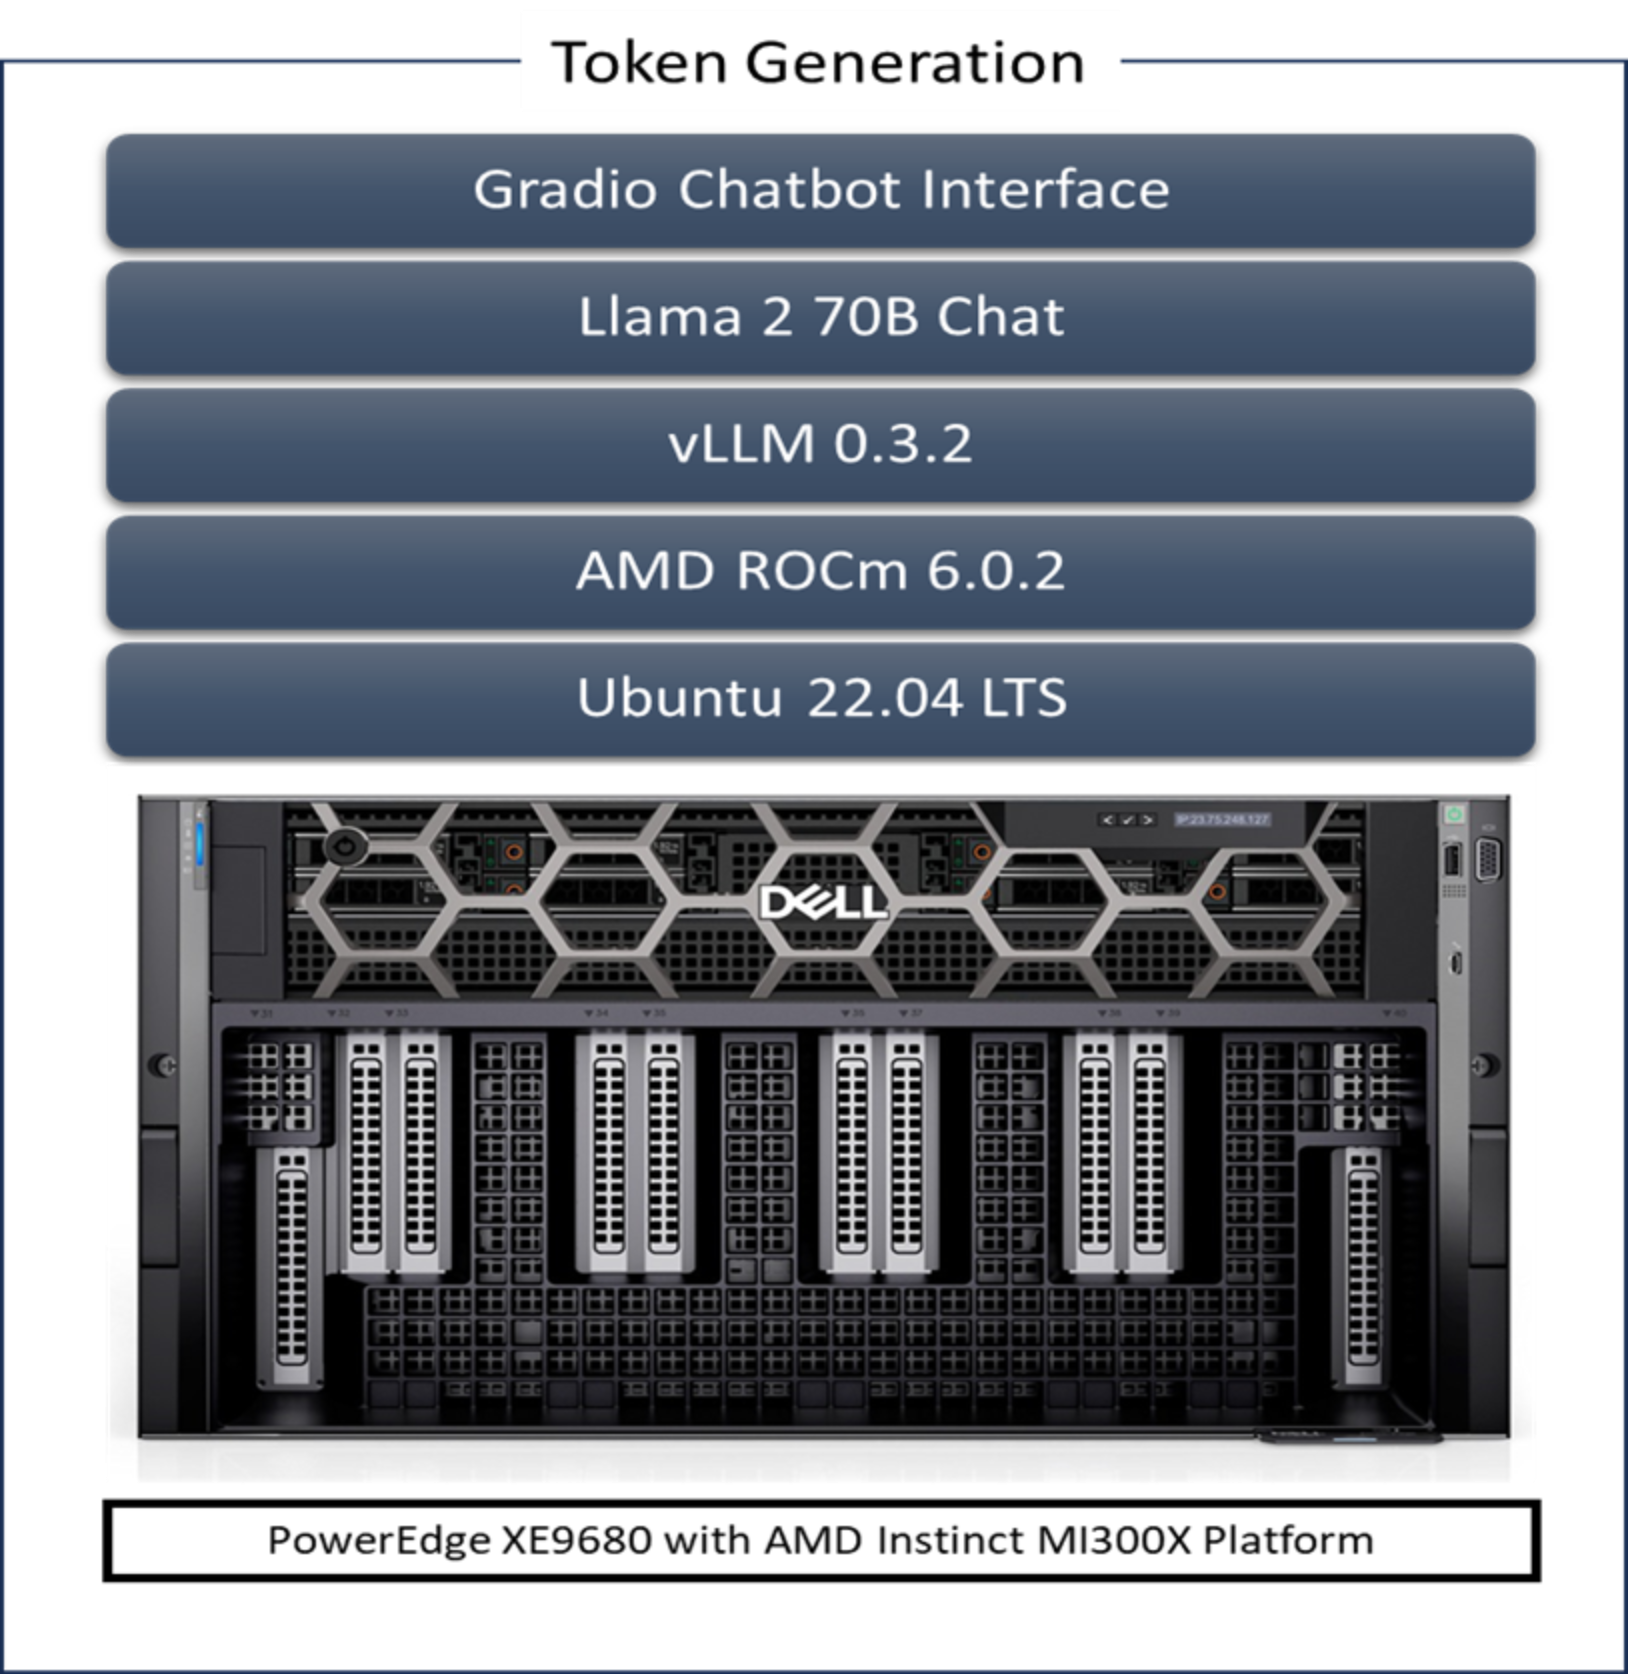 A figure showing the software stack of the token generation solution. From top down: Gradio chatbot interface, Llama2 70B chat, vLLM, AMD ROCm, and Ubuntu 22.04